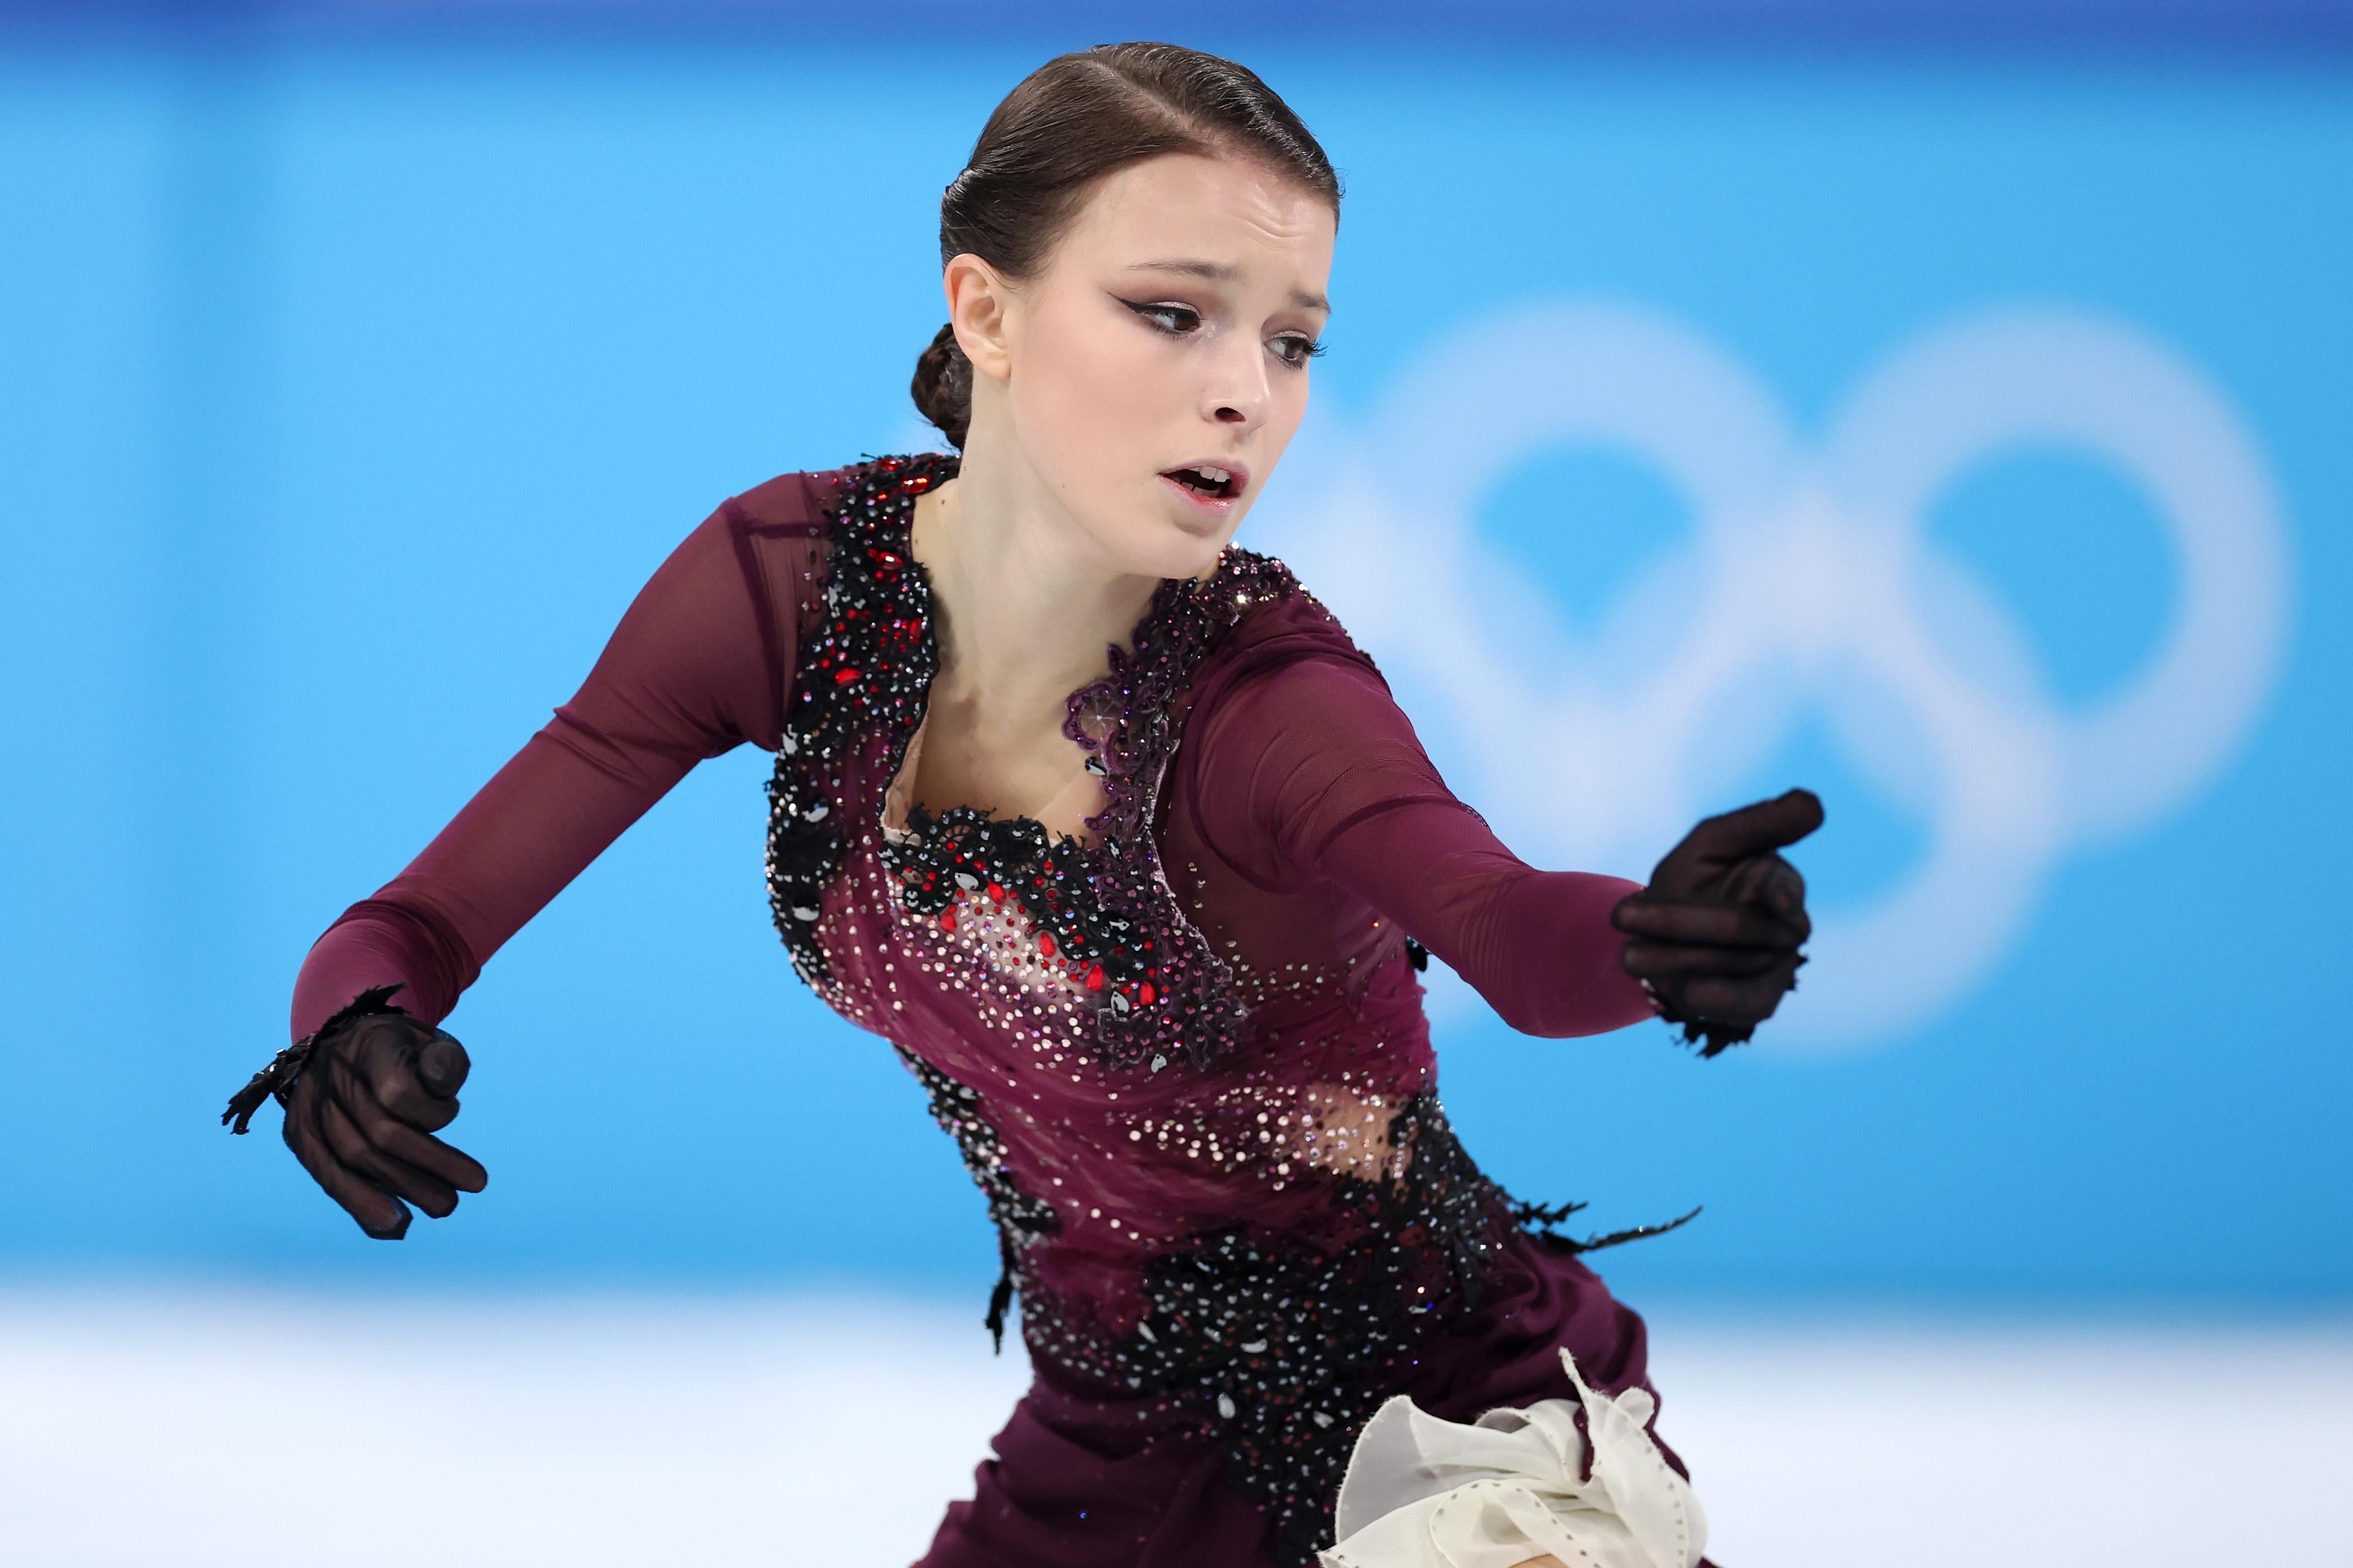 Anna Shcherbakova skating with her arms outstretched on the ice